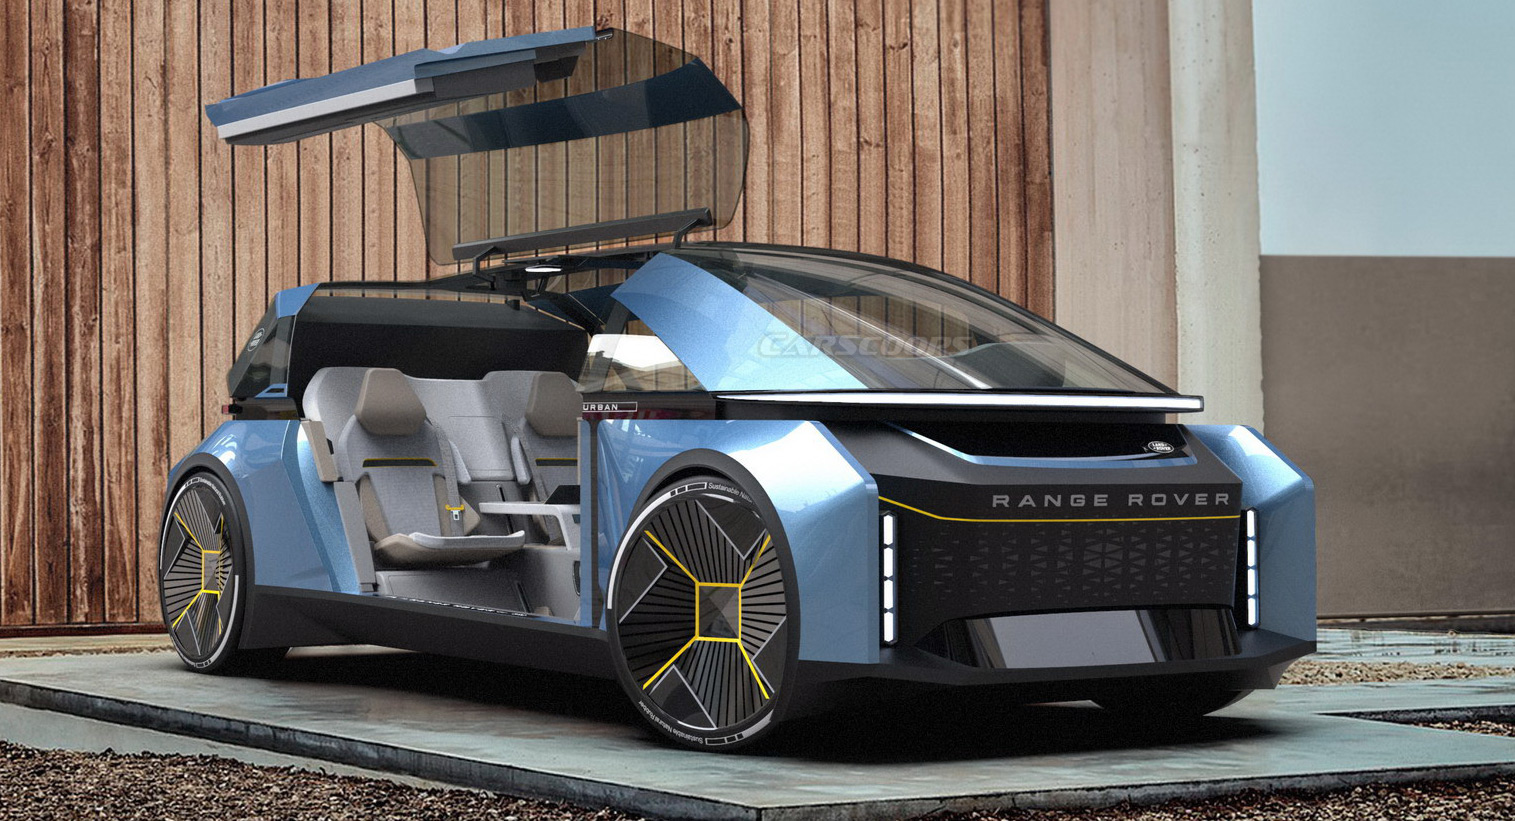 What Would A Future Range Rover For Urban Life Look Like In A Fully